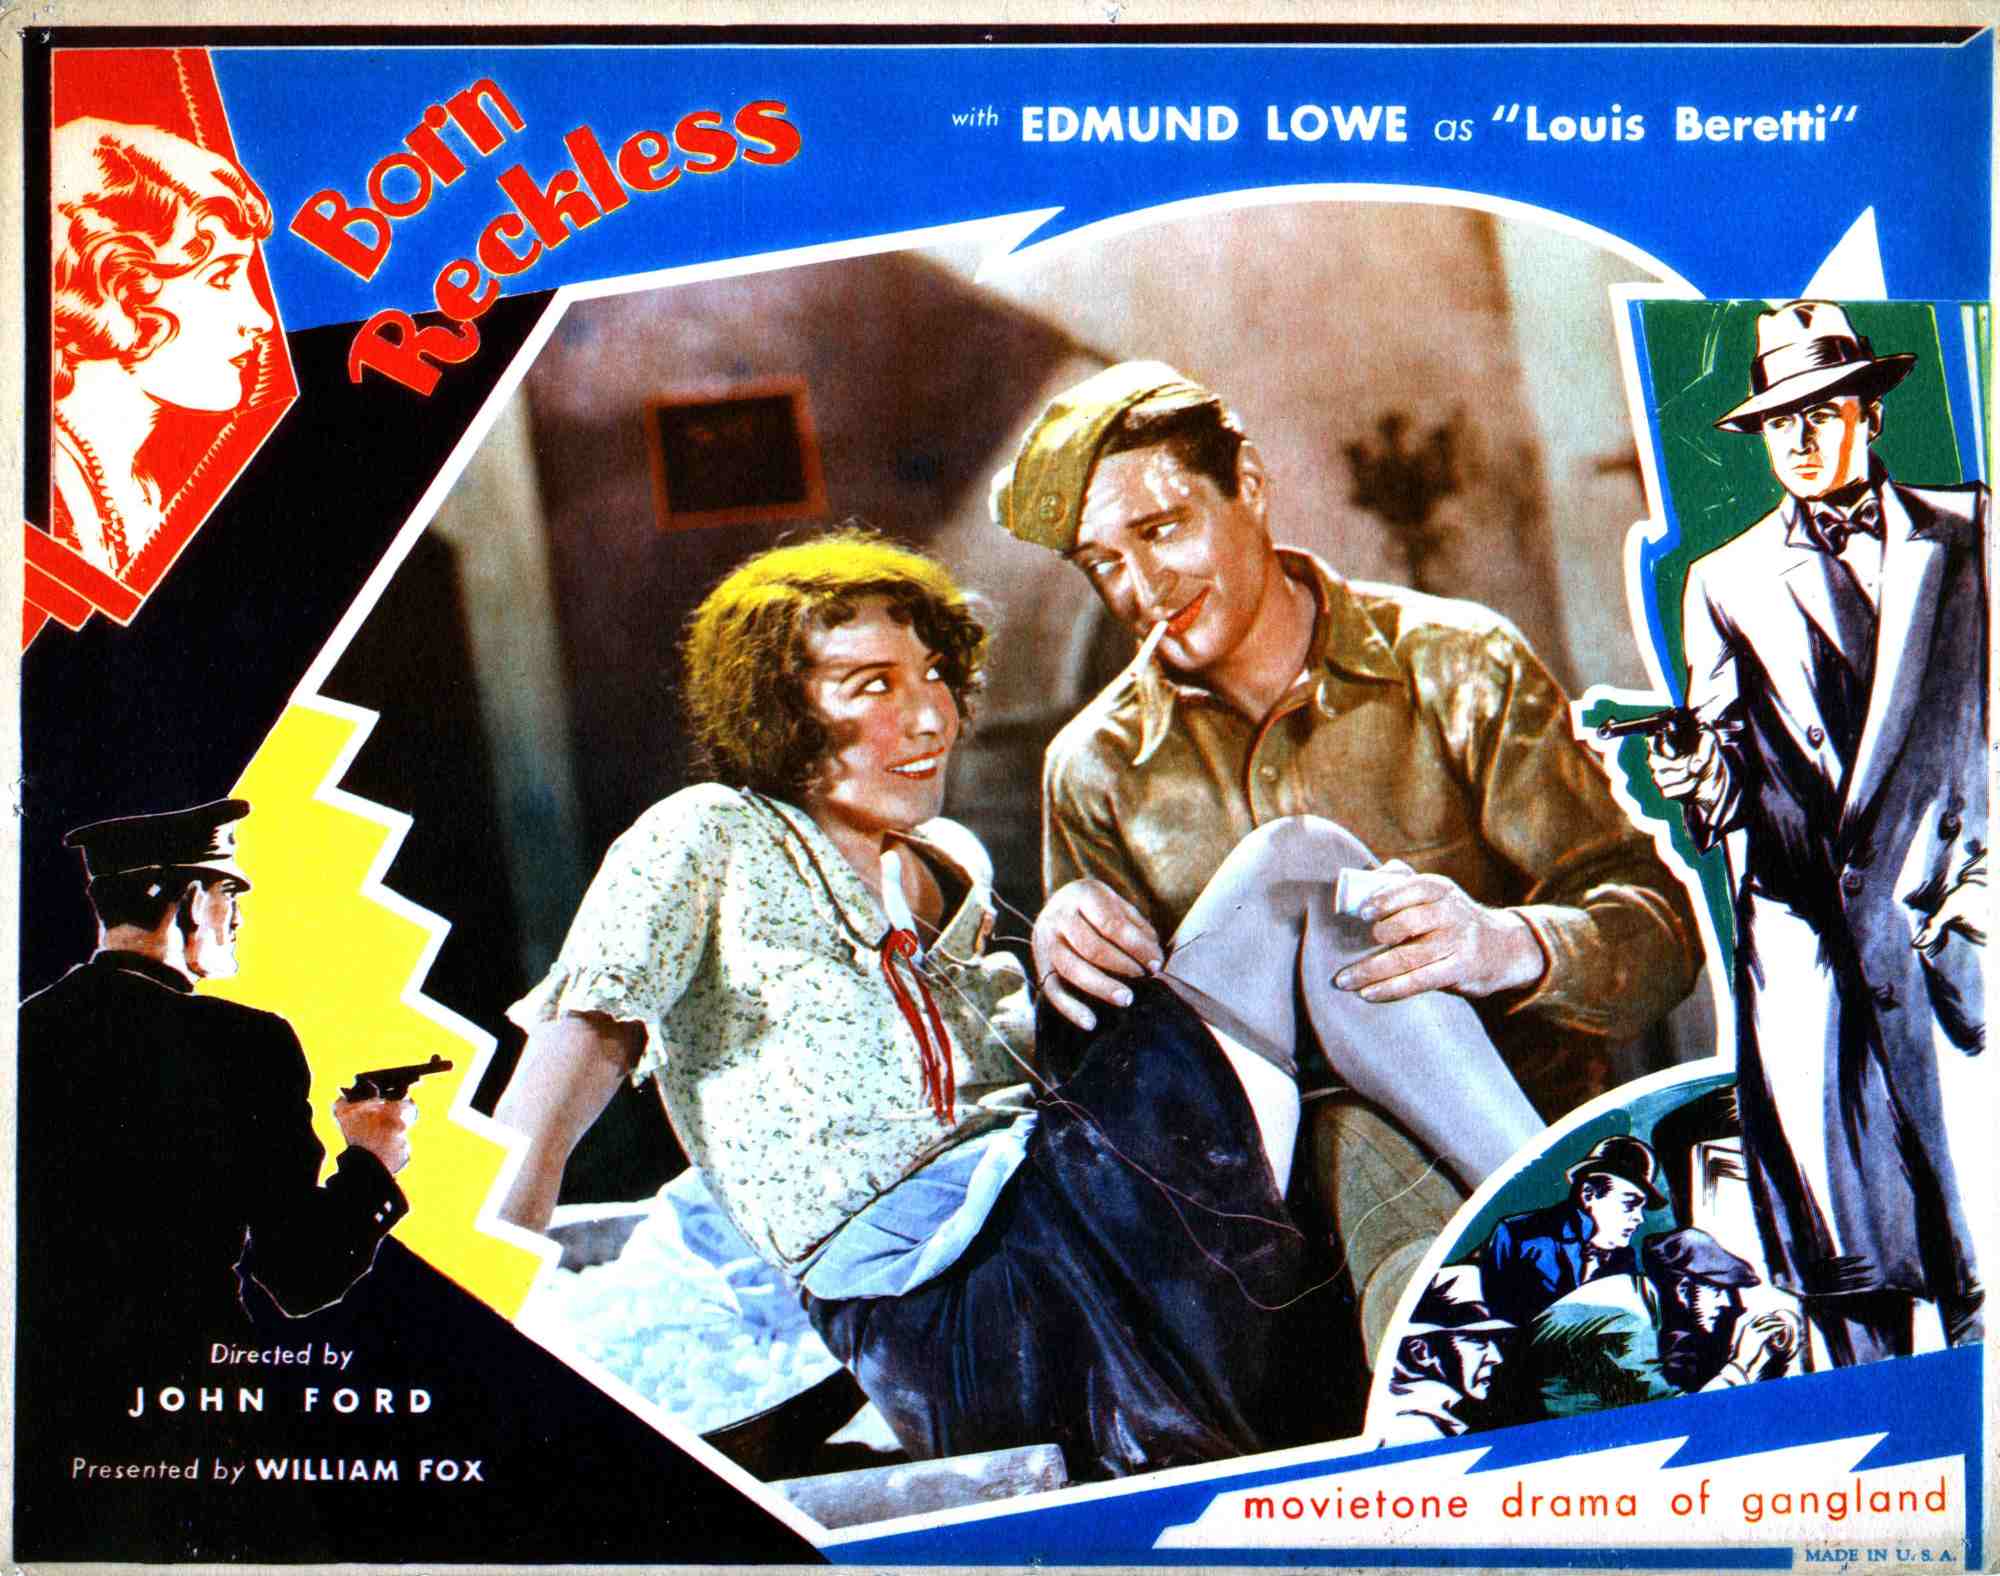 'Born Reckless' Marguerite Churchill as Rosa Beretti and Edmund Lowe as Louis Beretti smiling as he holds onto her leg.